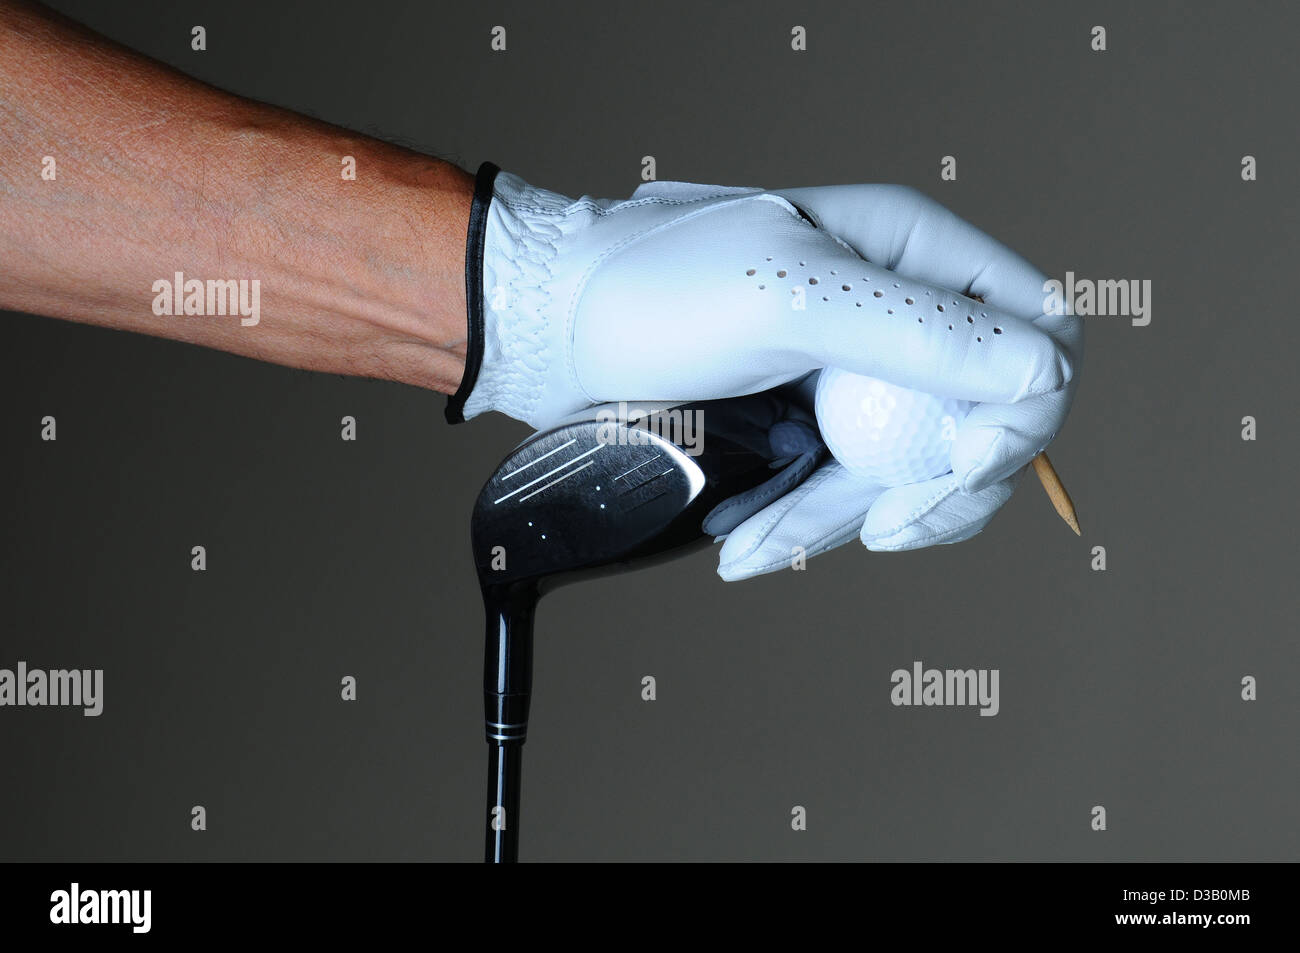 Closeup of a golfers hand holding a club head, golf ball and tee over a light ot dark gray background. Stock Photo